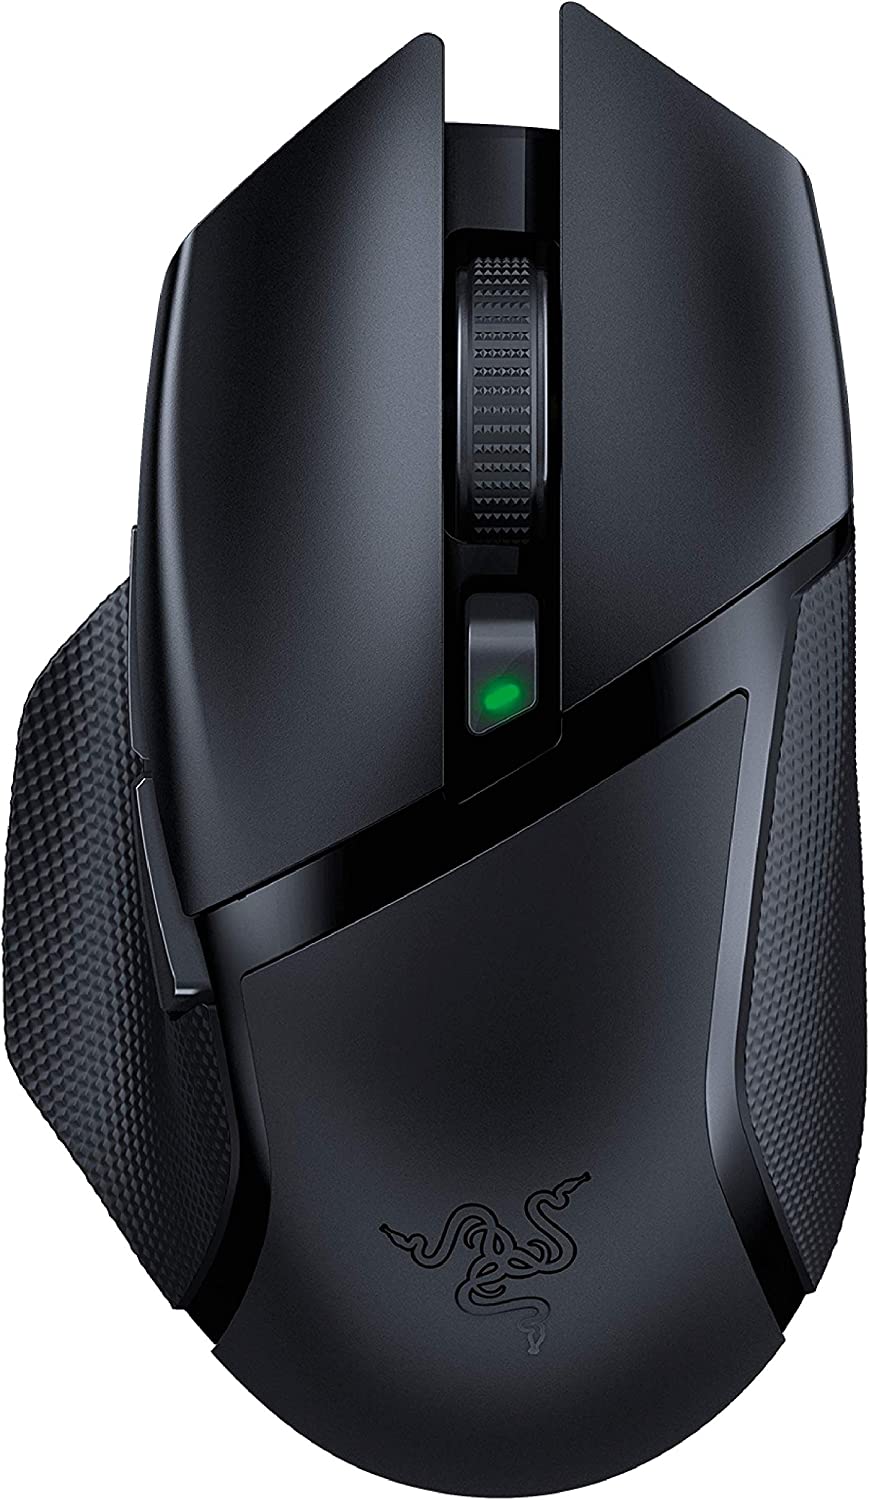 Razer's Basilisk X gaming mouse is now available for a new low price of $35